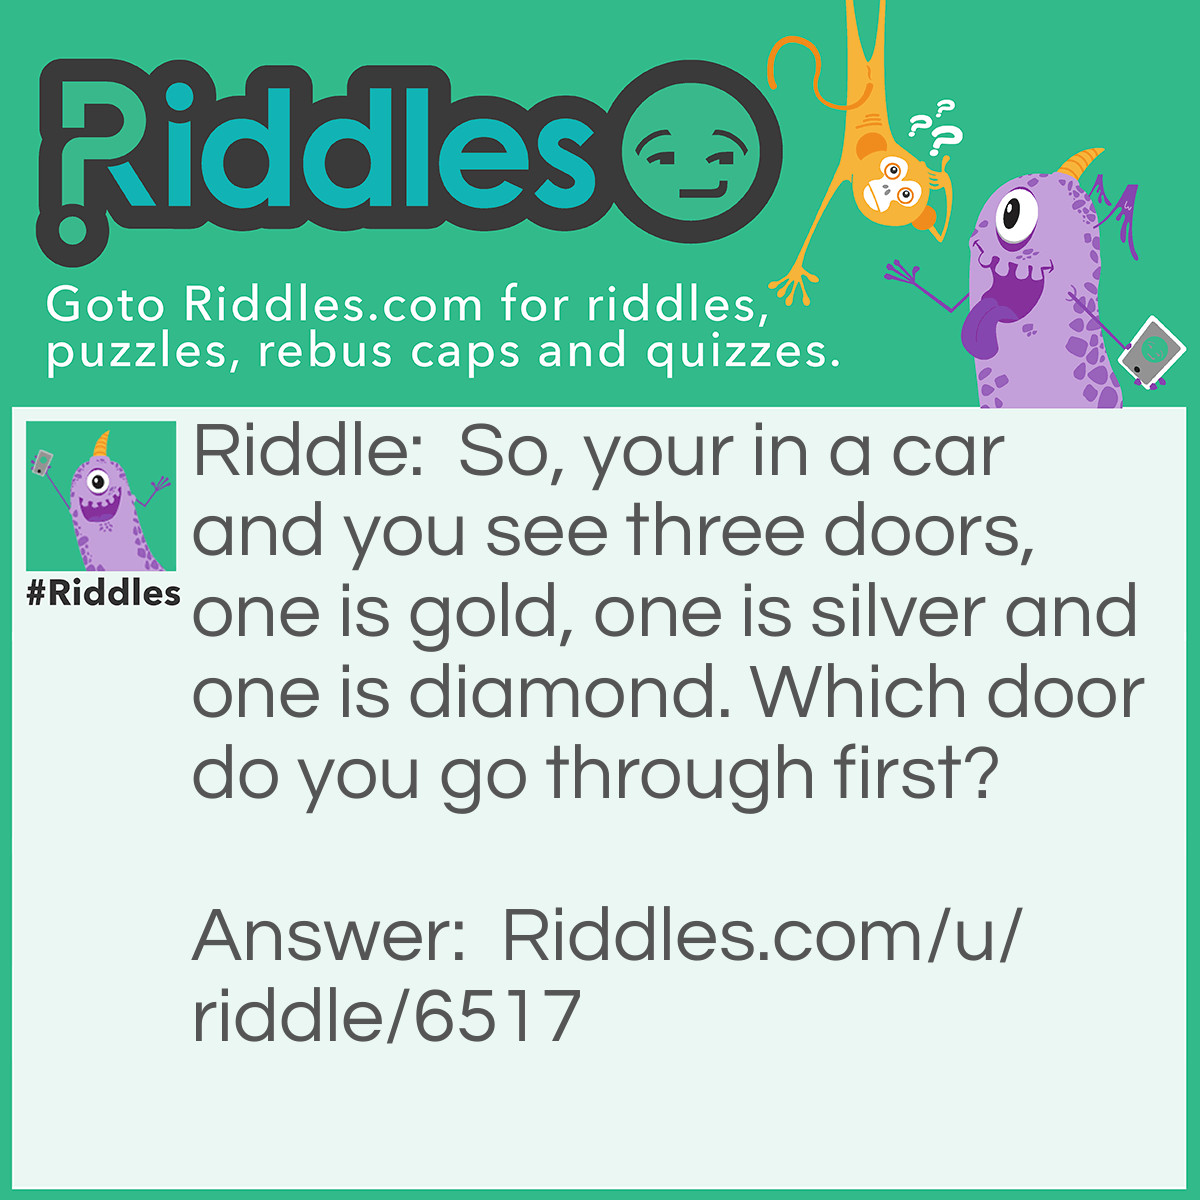 Riddle: So, your in a car and you see three doors, one is gold, one is silver and one is diamond. Which door do you go through first? Answer: The car door.